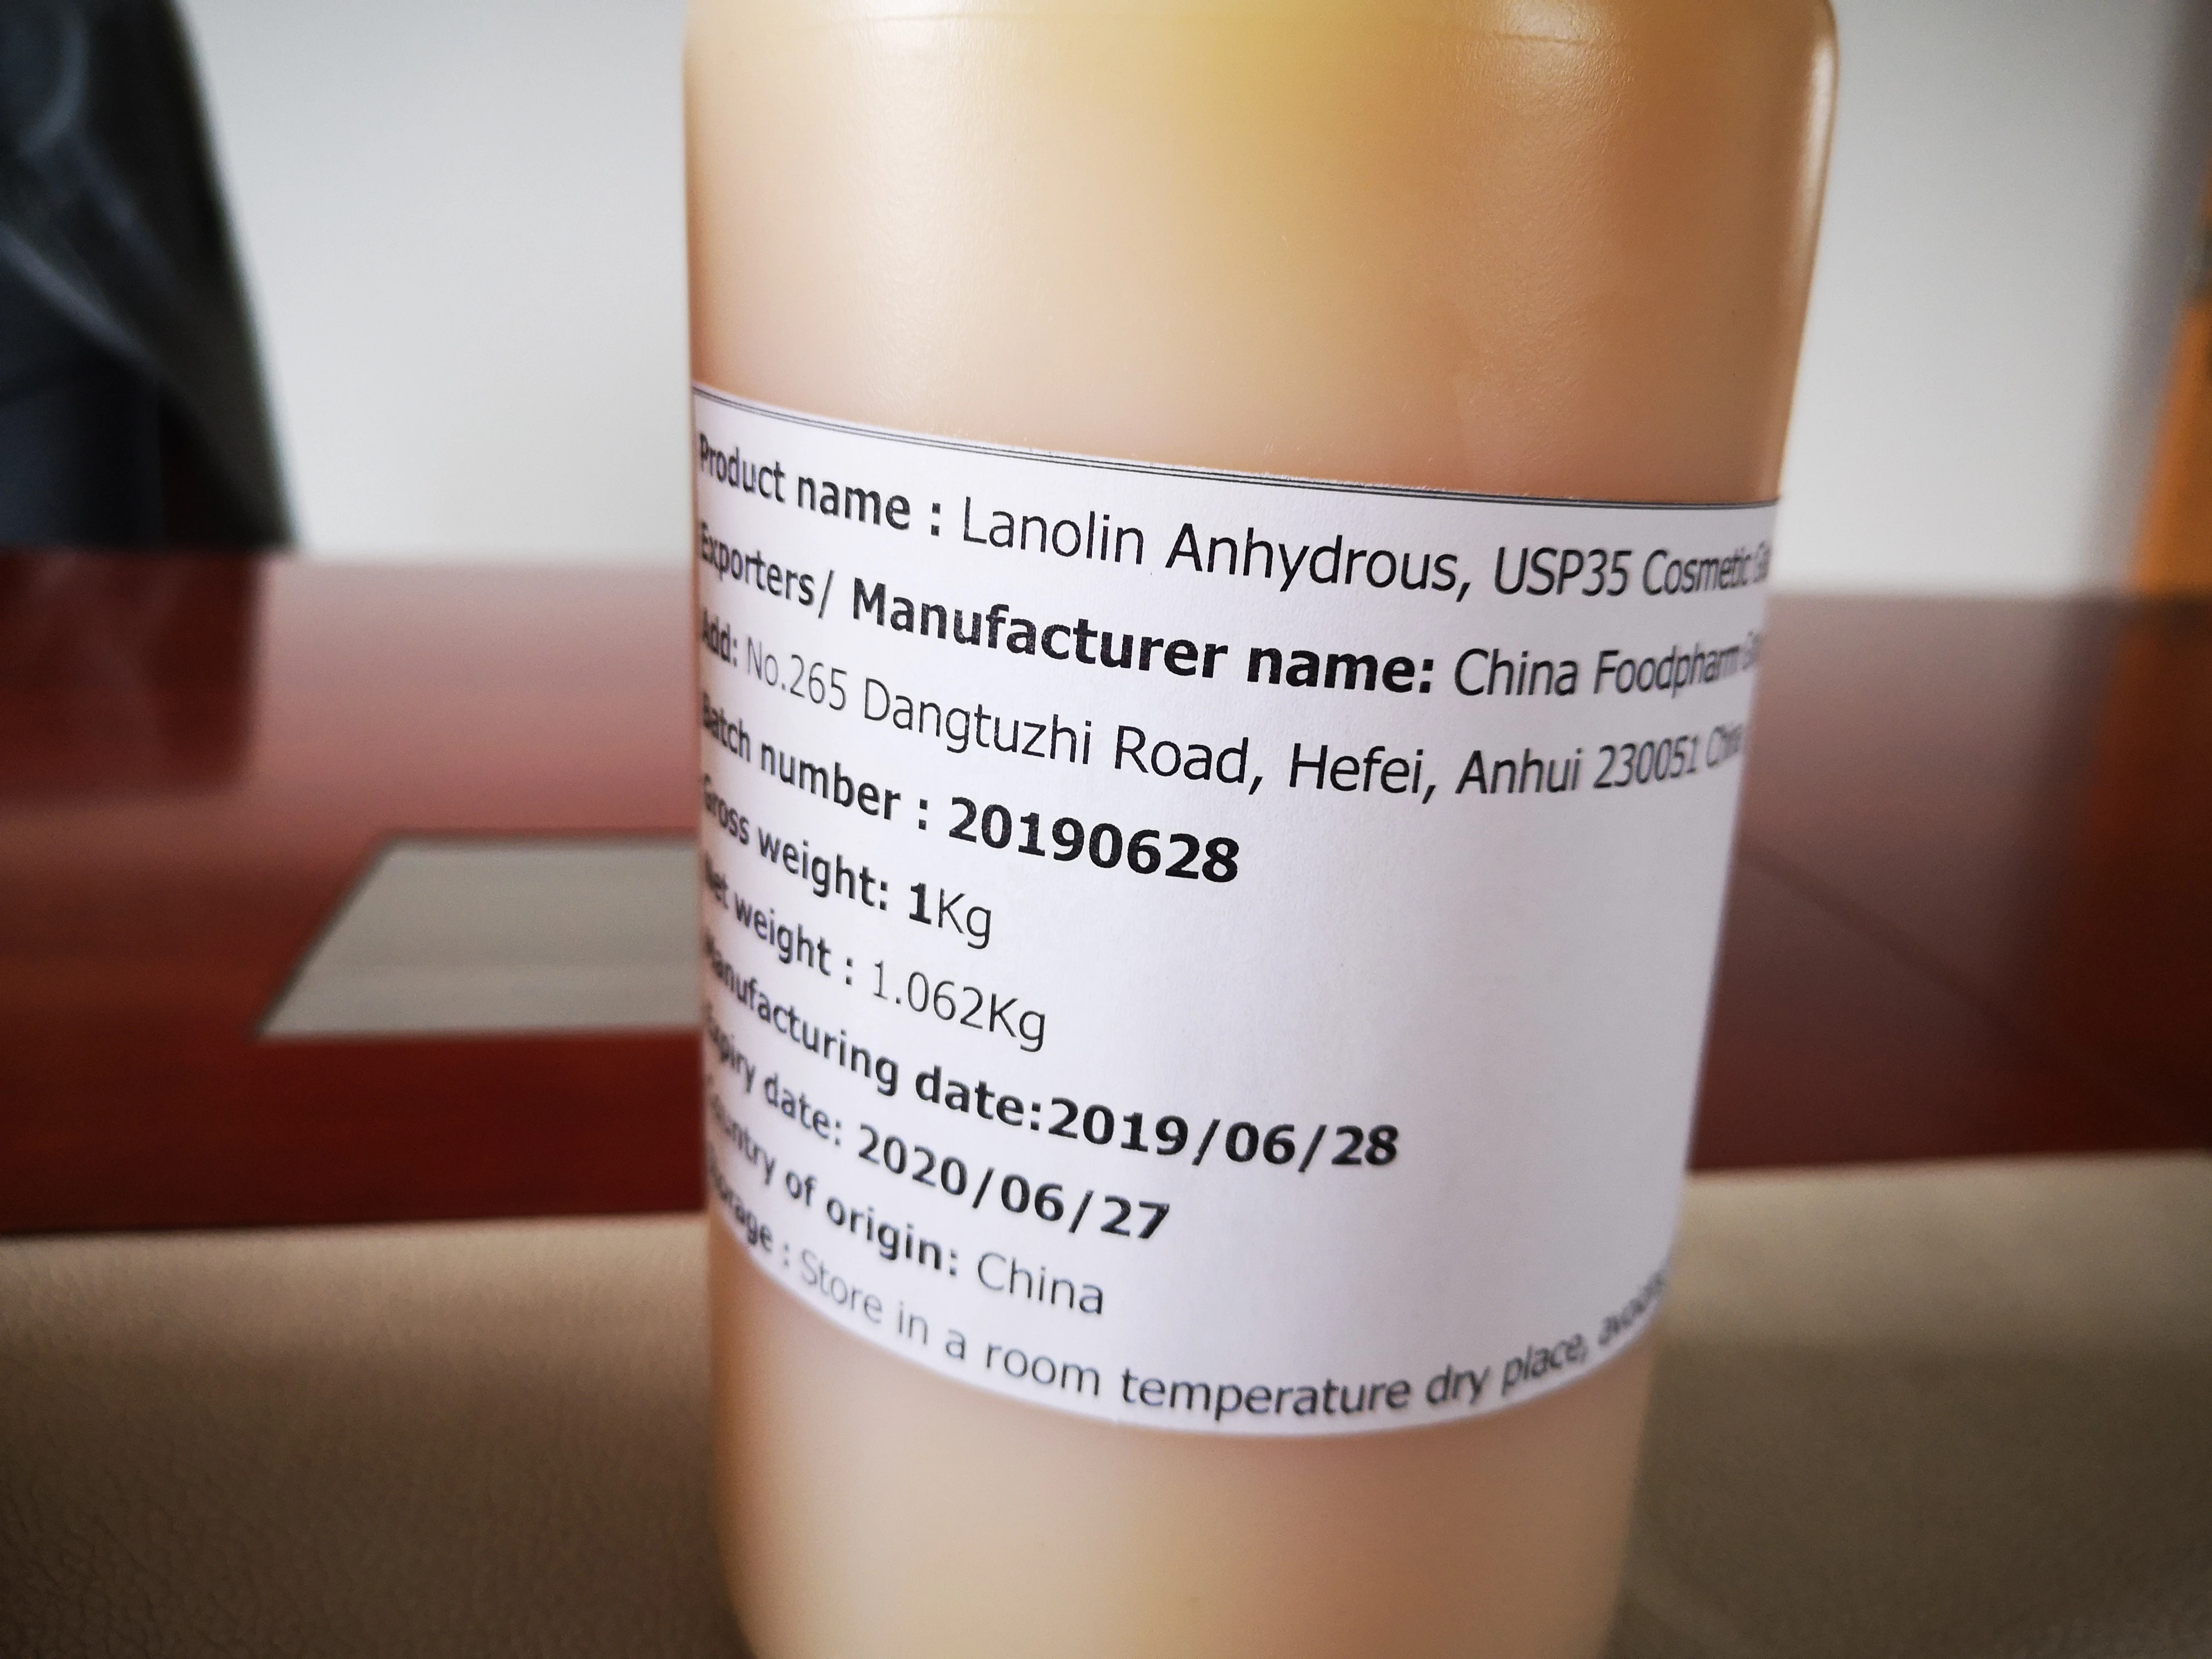 Pure Lanolin Anhydrous /Wool Fat / Pharmaceutical Grade Ultra USP 35 Grade for skin care material